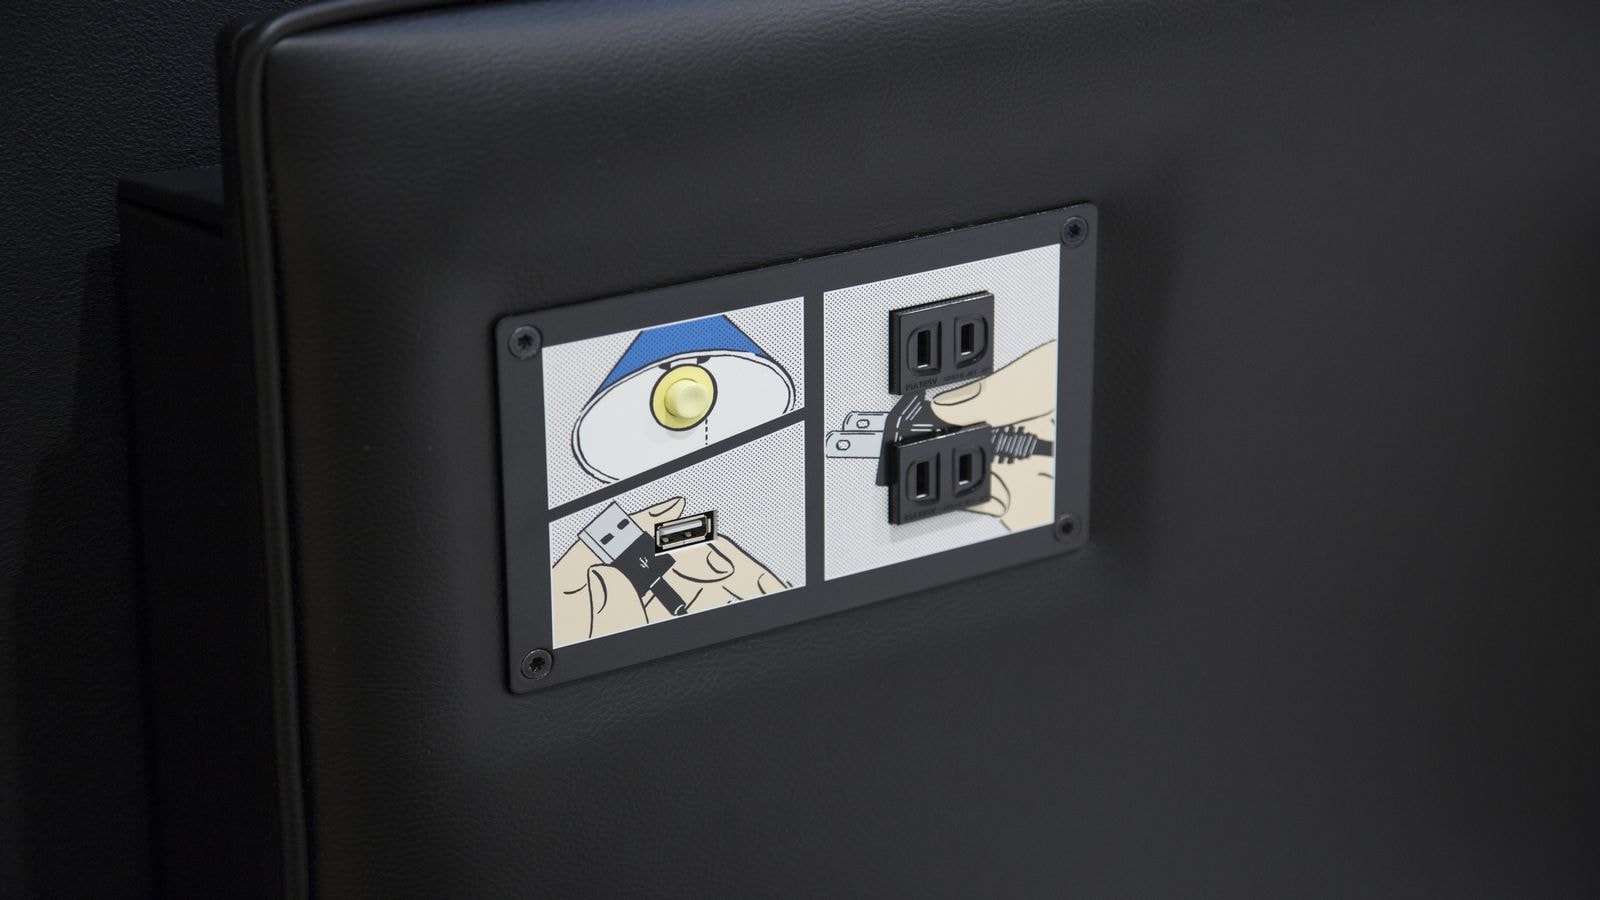 [Guest room] Designed to the smallest details such as the power switch.